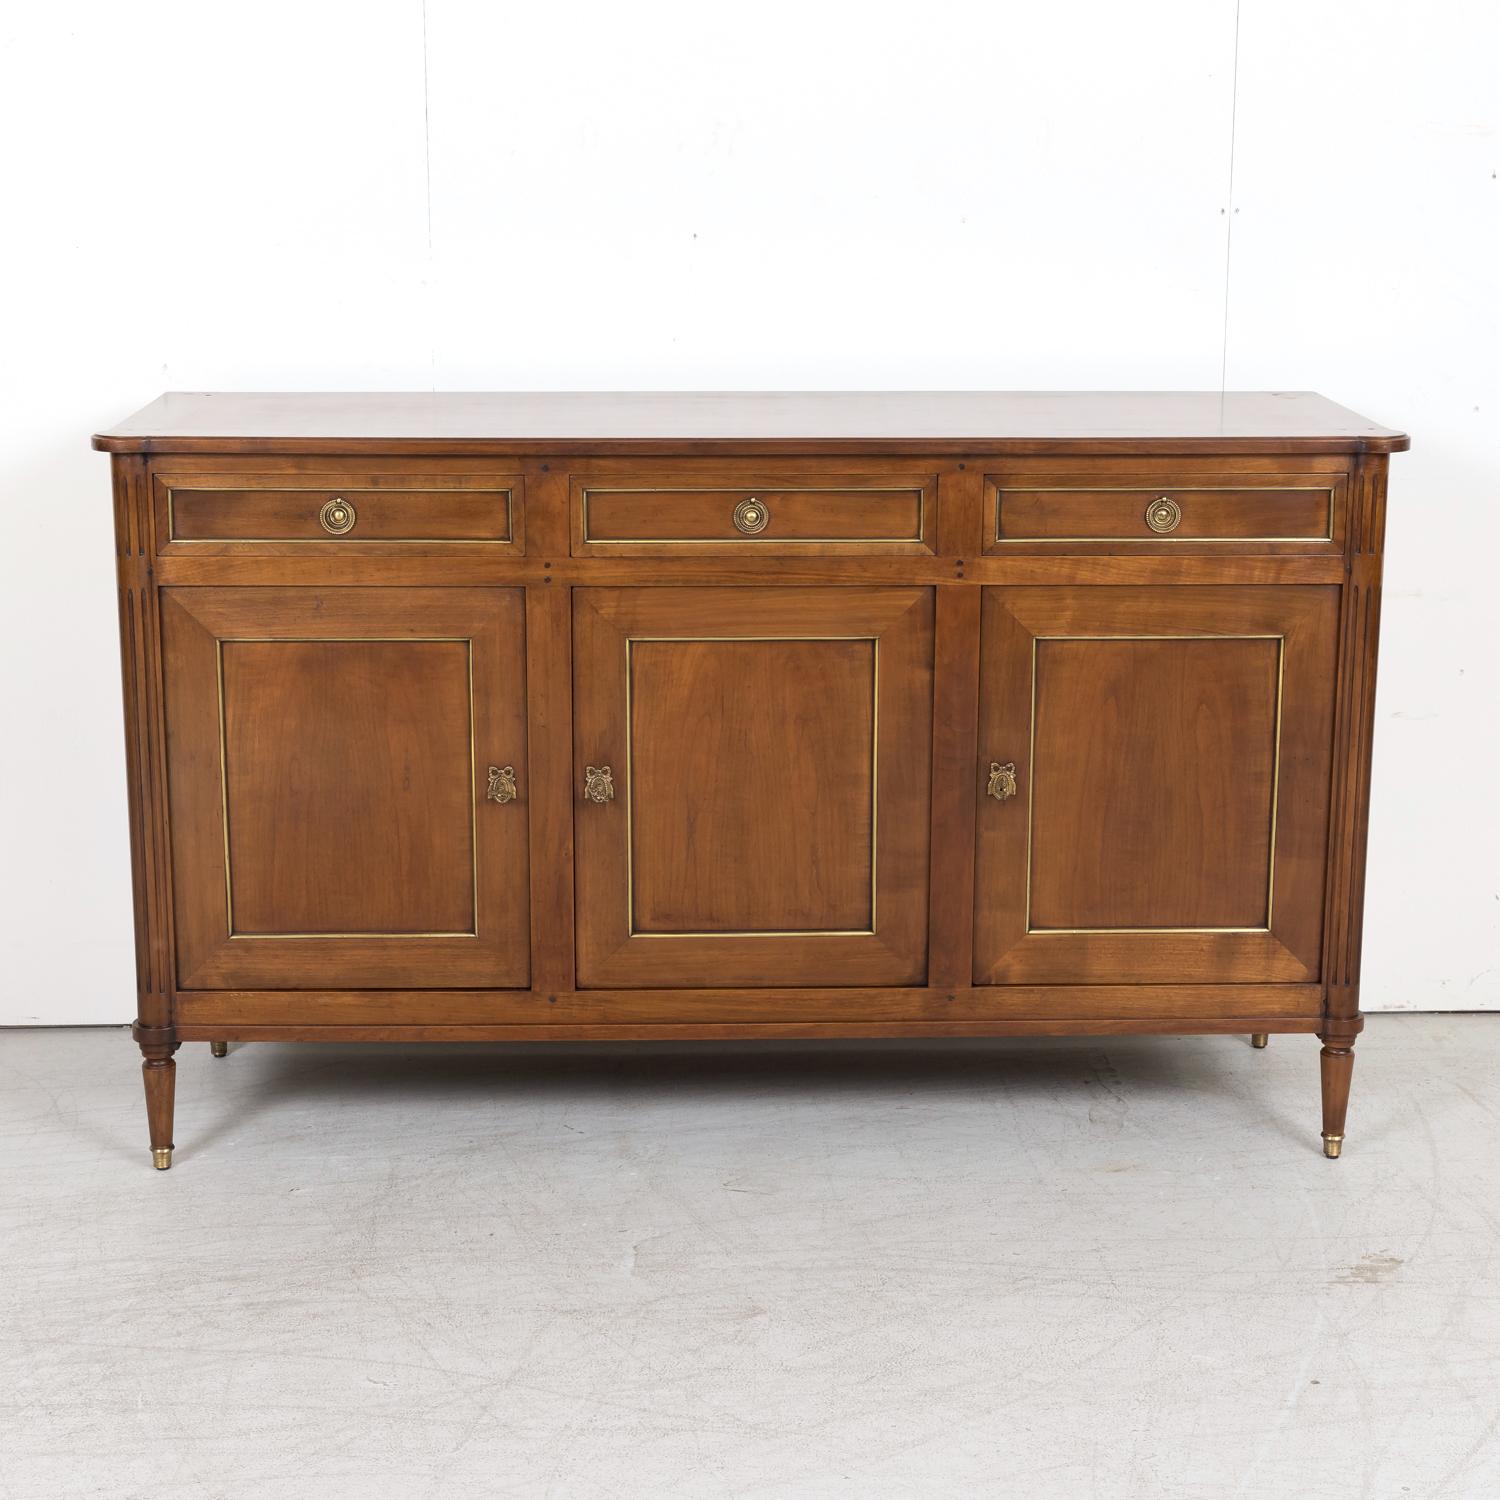 Antique French Louis XVI style solid cherry enfilade buffet, circa 1920s. This elegant Parisian enfilade with its straight lines and wonderful patina has a slightly overhanging top with cookie cutter corners atop three drawers over three paneled